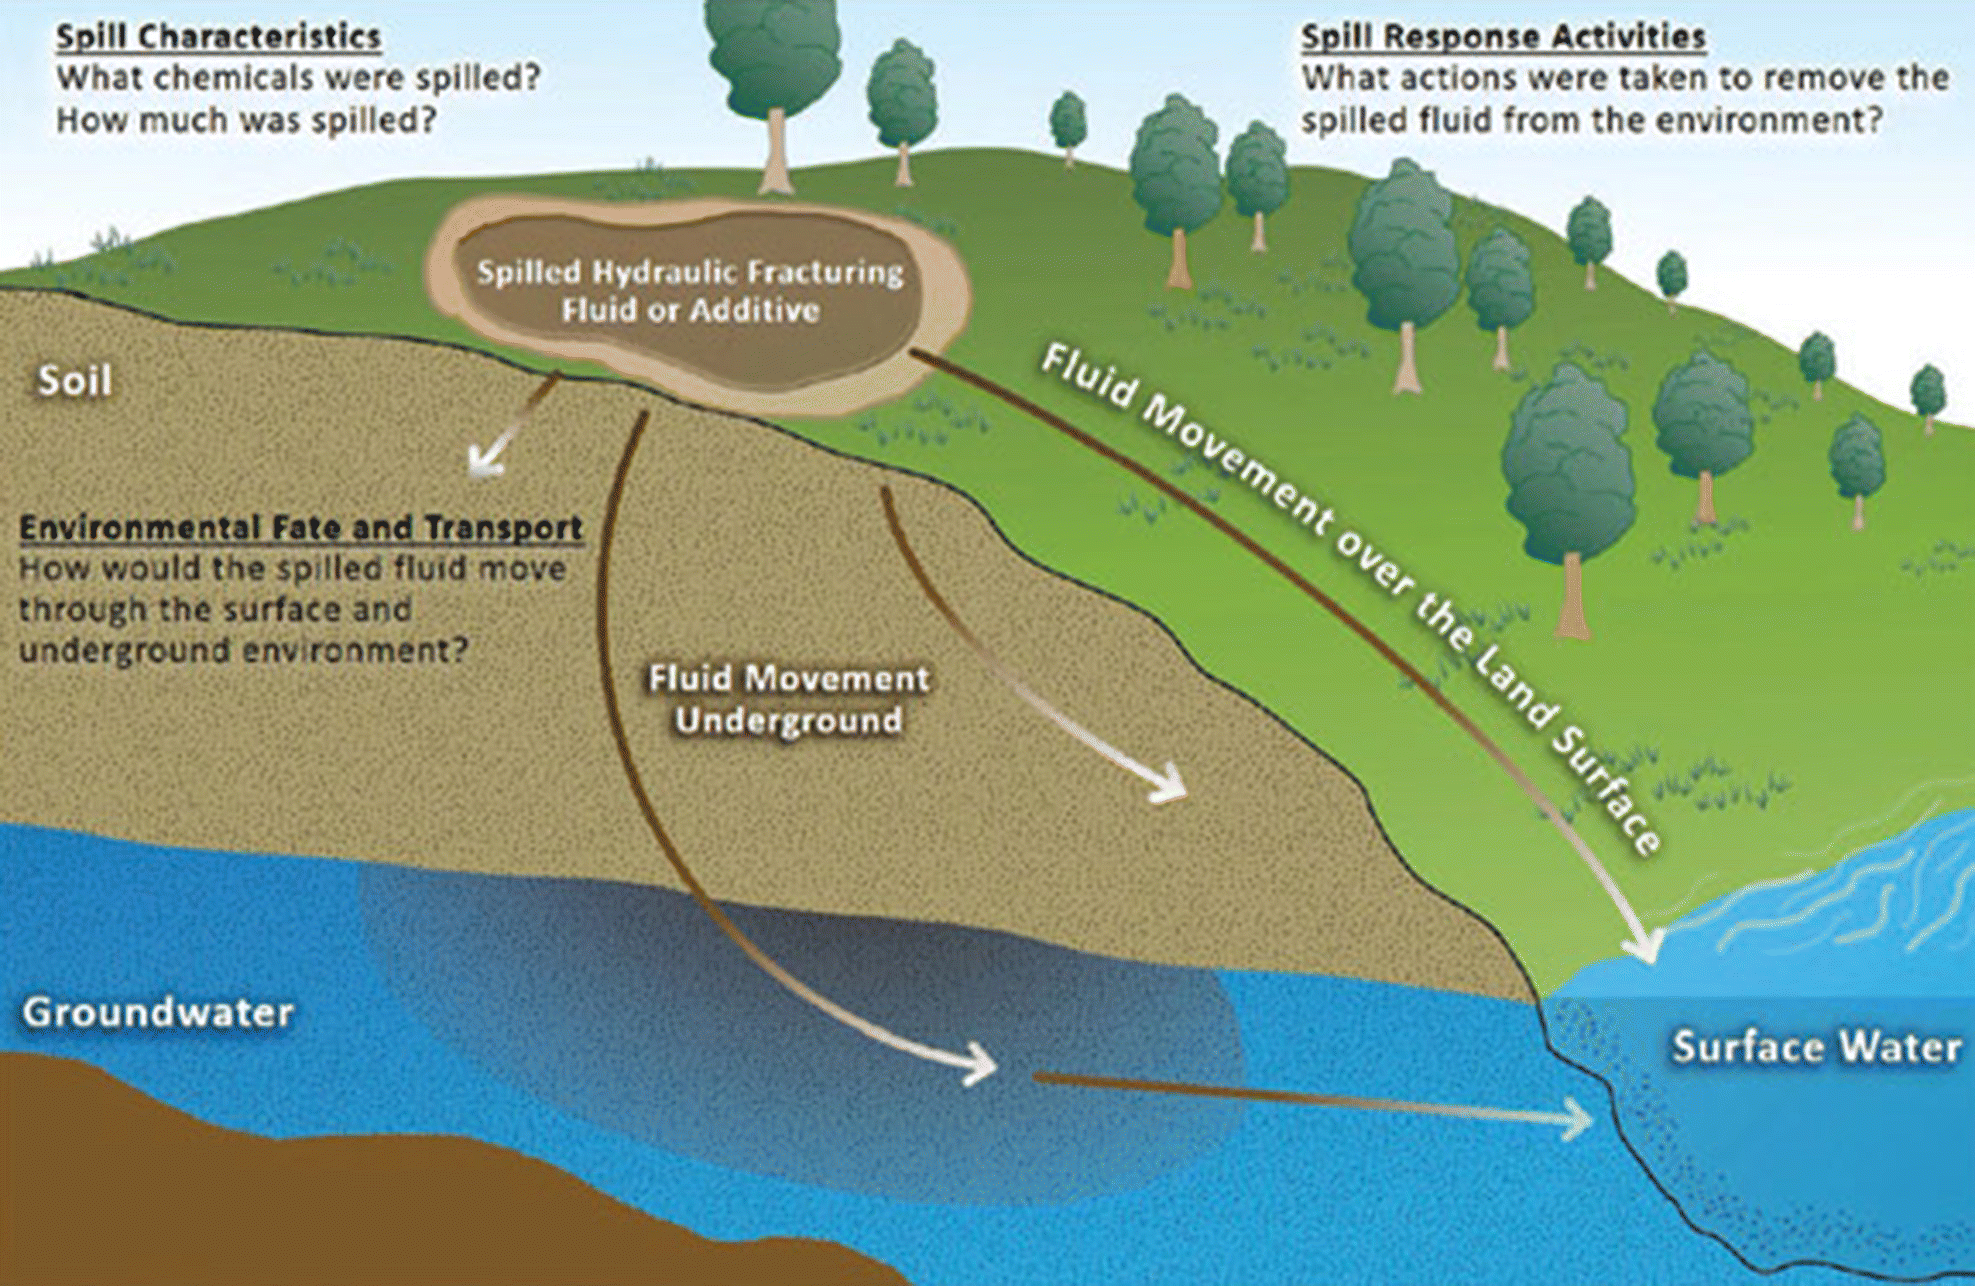 Illustration displaying an area labeled “Spilled hydraulic fracturing fluid or additive” attached with arrows depicting fluid movement over land surface and fluid movement underground.